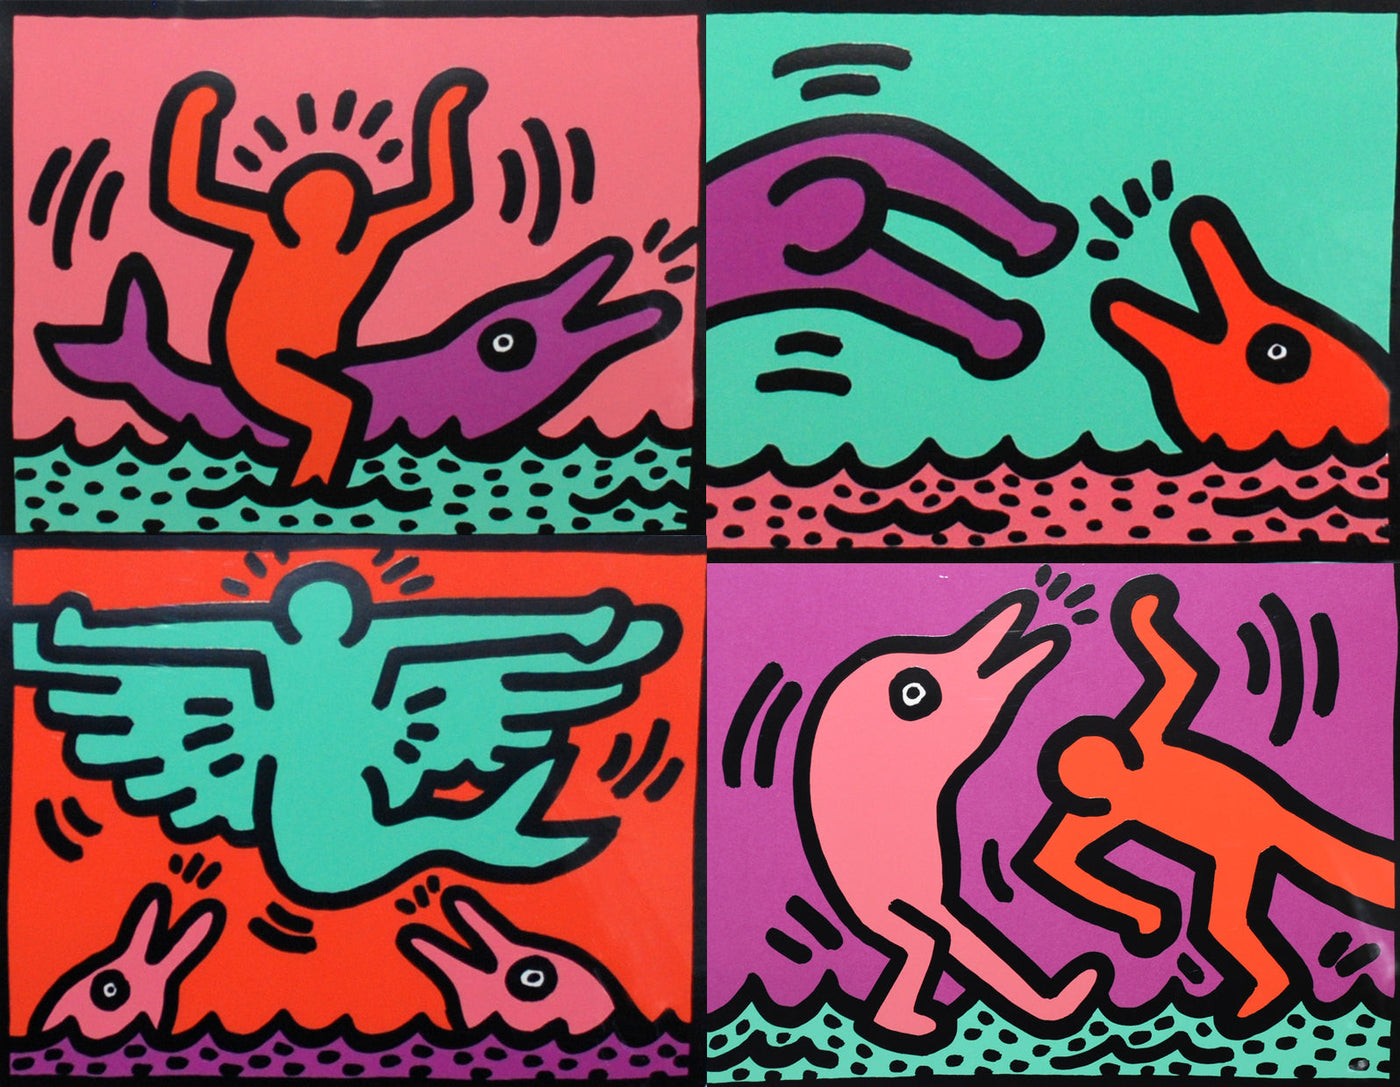 Keith Haring Pop Shop V (Set of Four) (Littmann Page 149) 1989